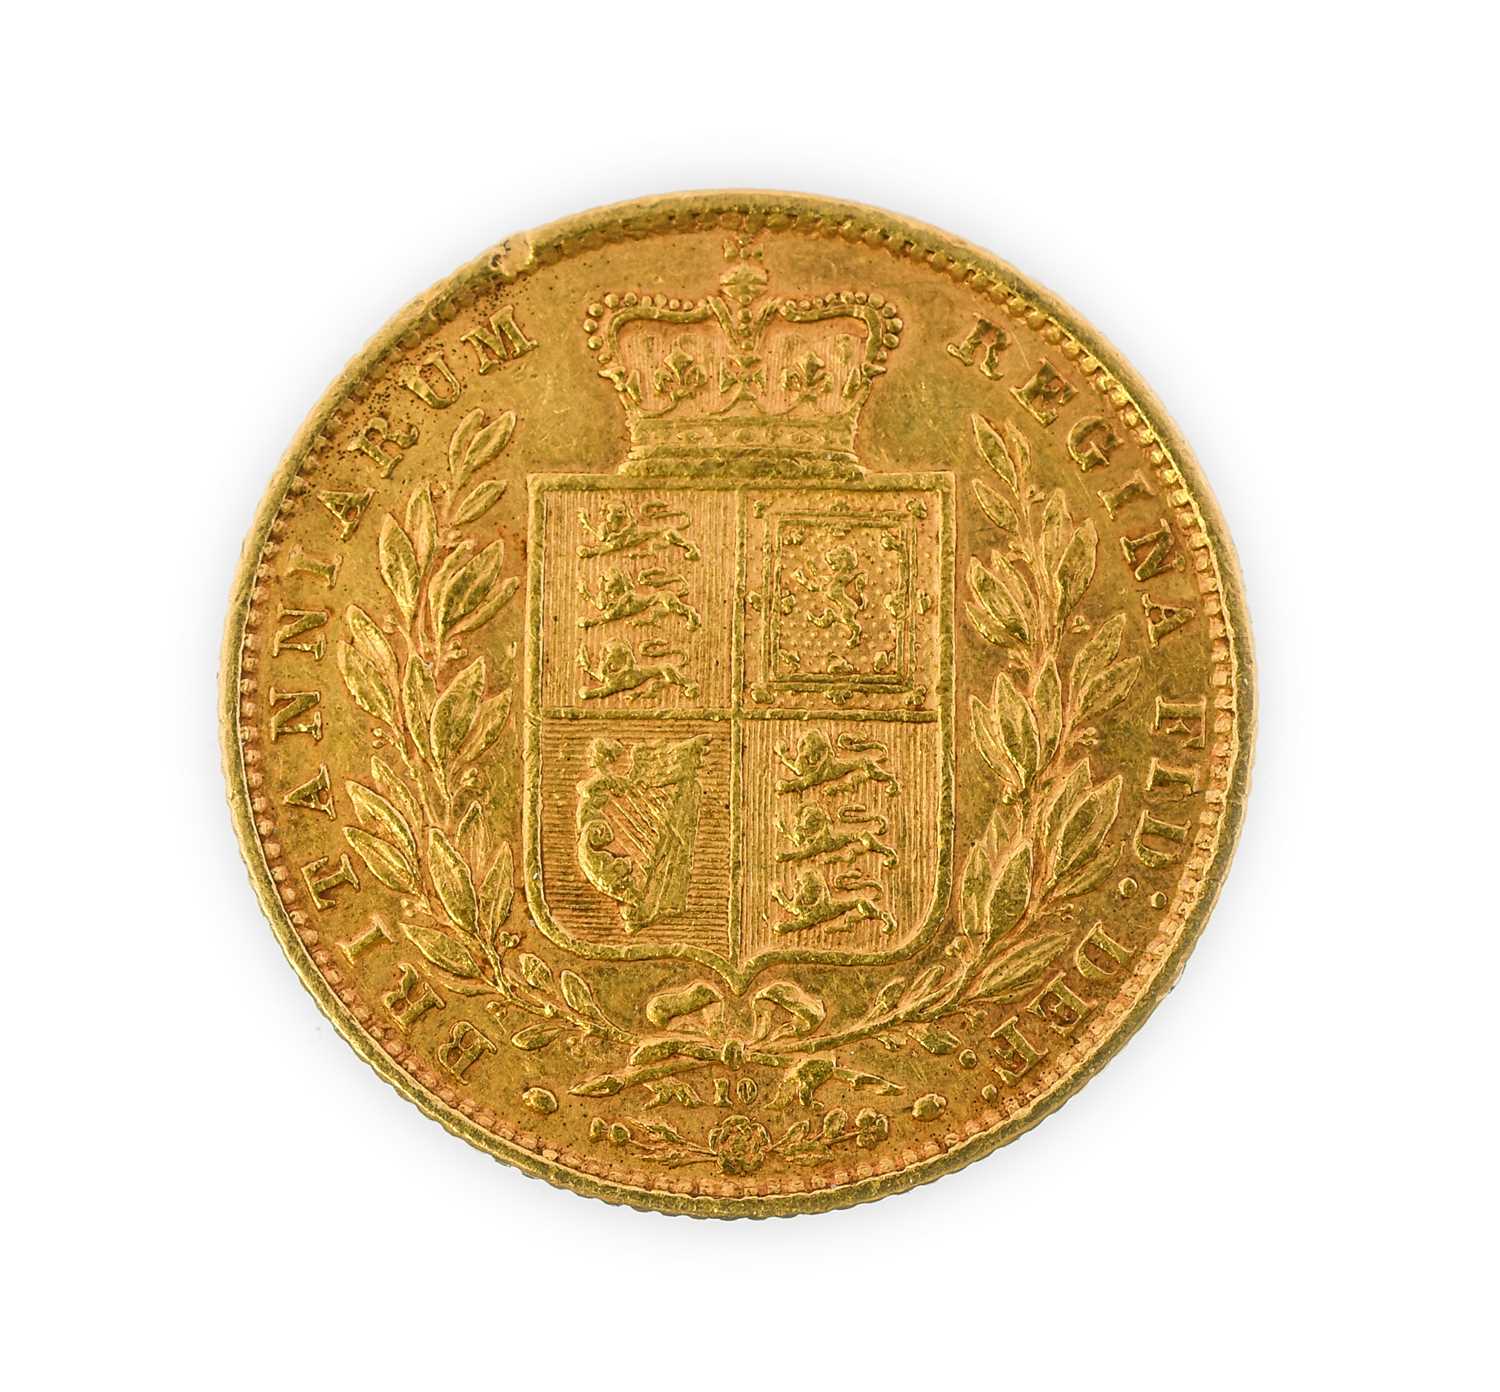 Victoria, Sovereign, 1873, young head left, rev. crowned shield, die number 10 below, (S.3853B). A